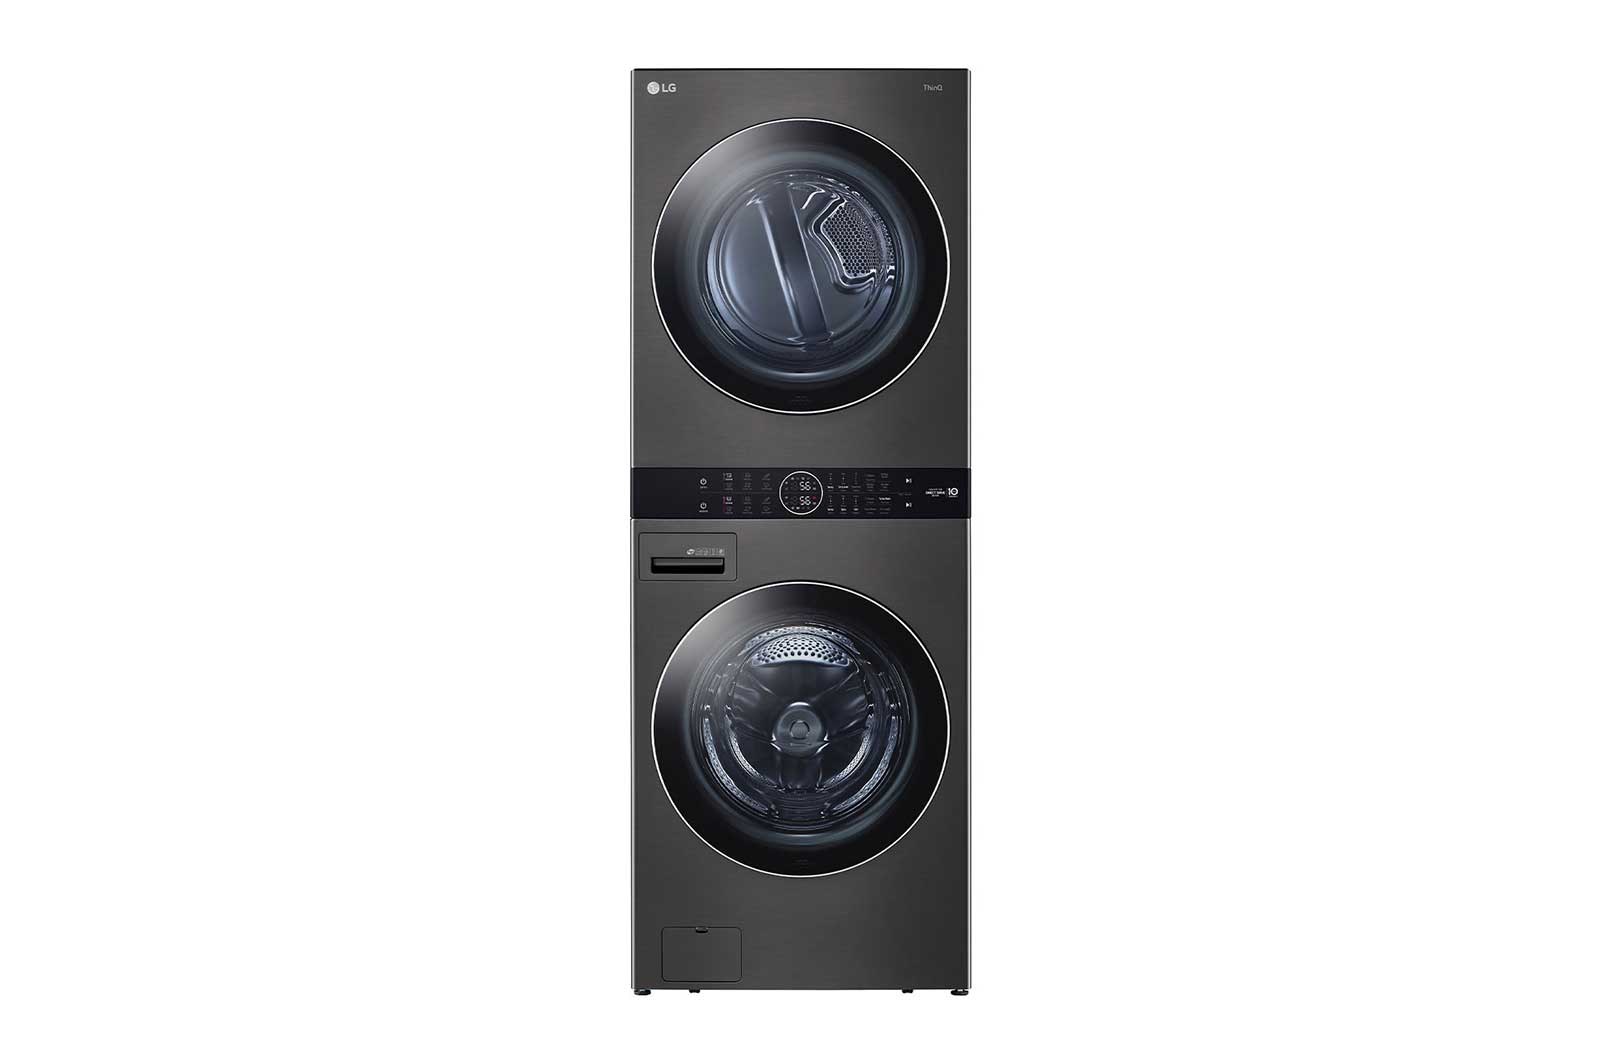 LG 17kg WashTower™ All-In-One Stacked Washer Dryer in Black Steel, WWT-1710B